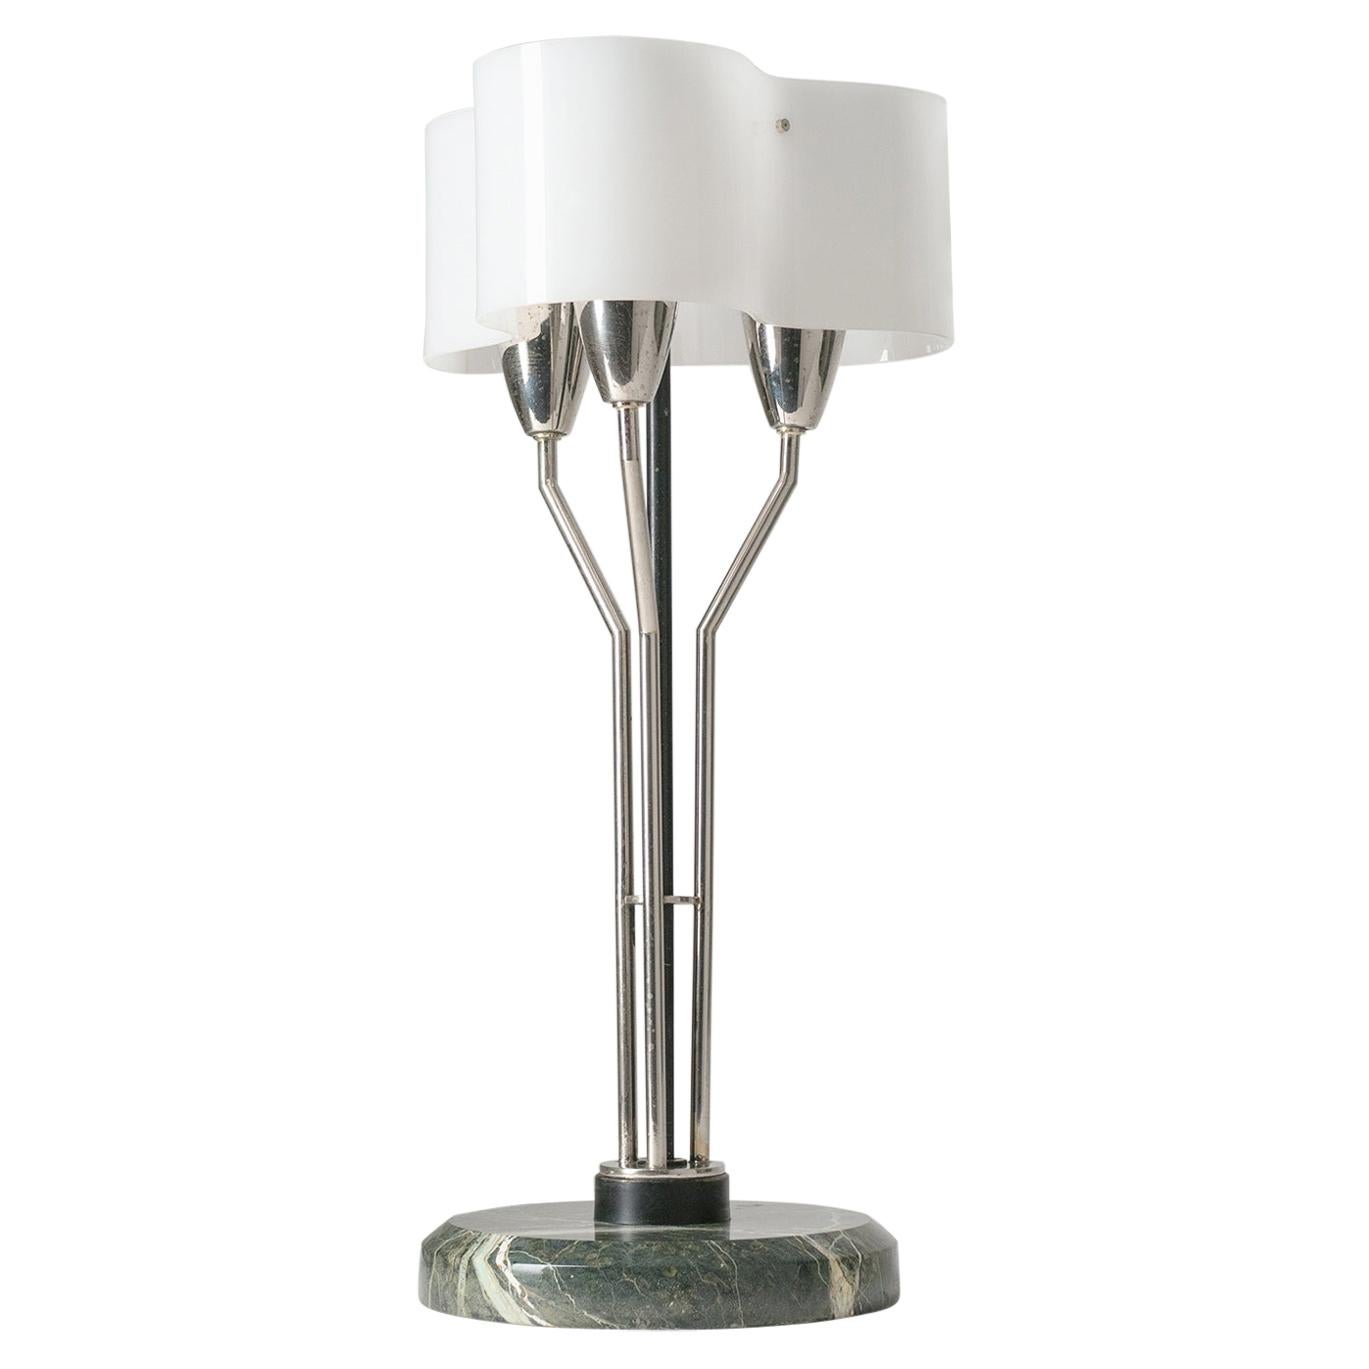 Italian Modernist Table Lamp, 1950s, Marble, Nickel and Acrylic